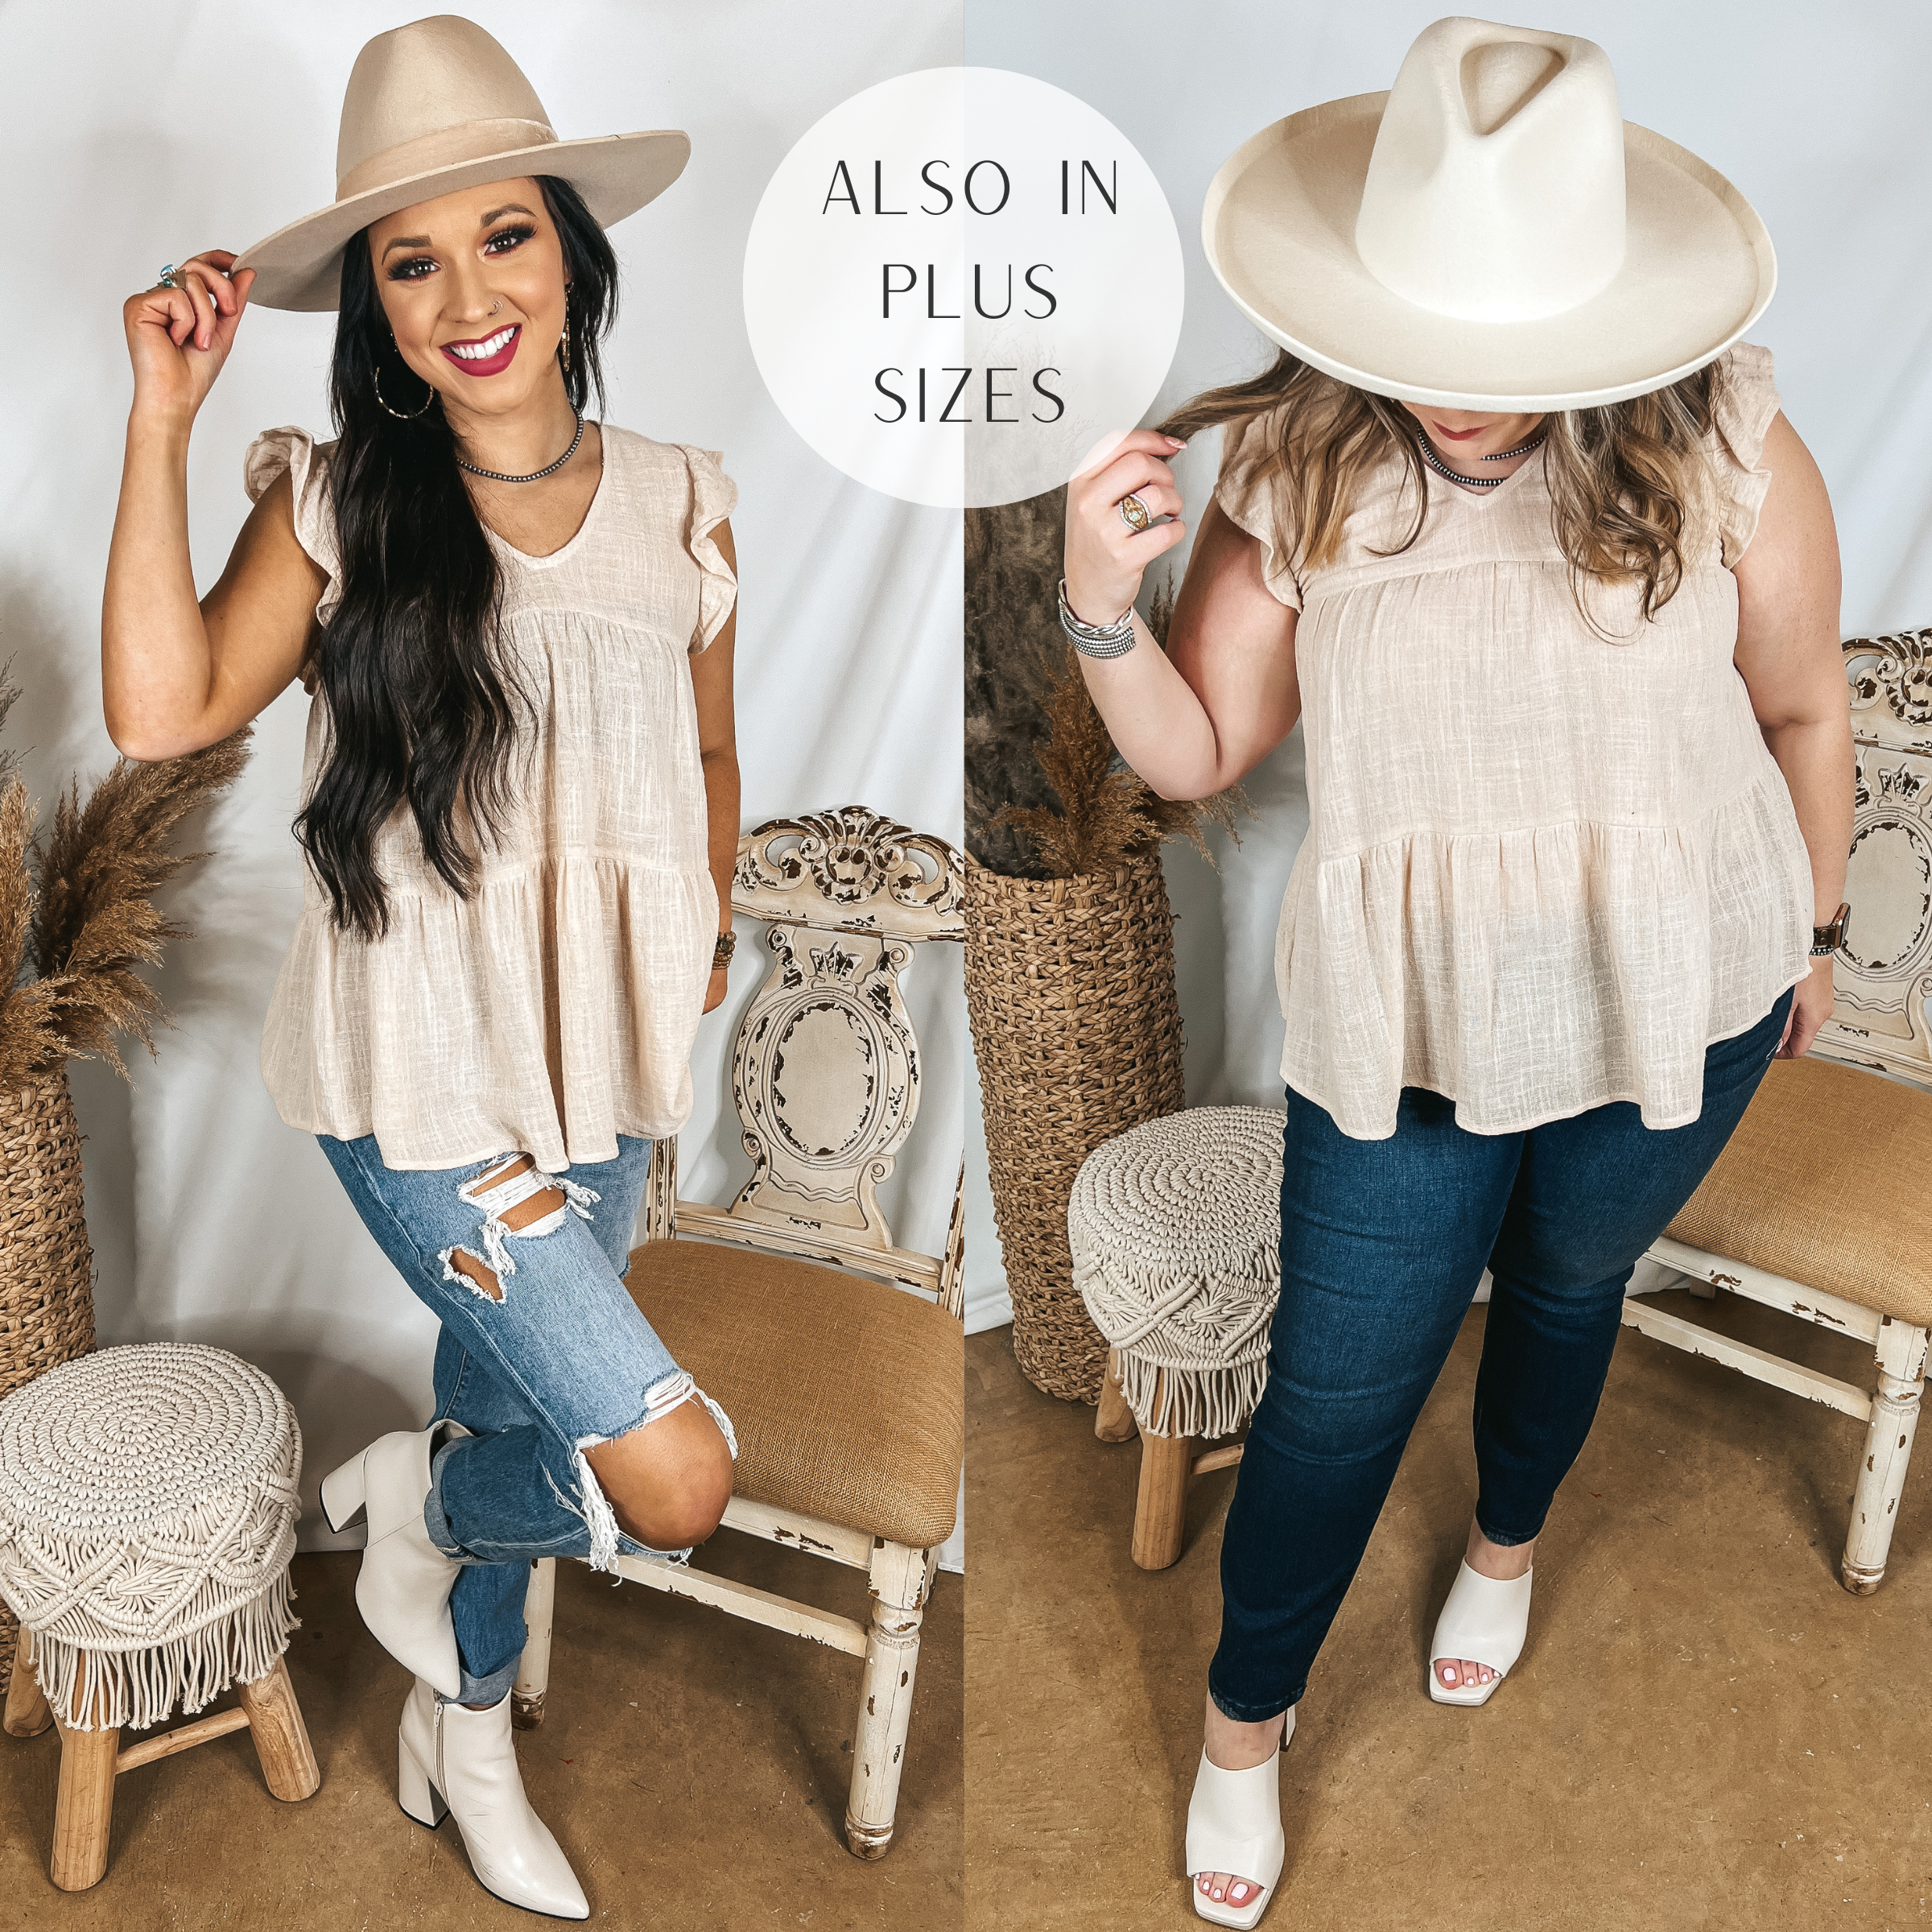 Models are wearing a beige cap sleeve top. Size small model has it paired with light wash distressed jeans, white booties, and a beige hat. Size large model has it paired with dark wash jeans, white heels, and a white hat.